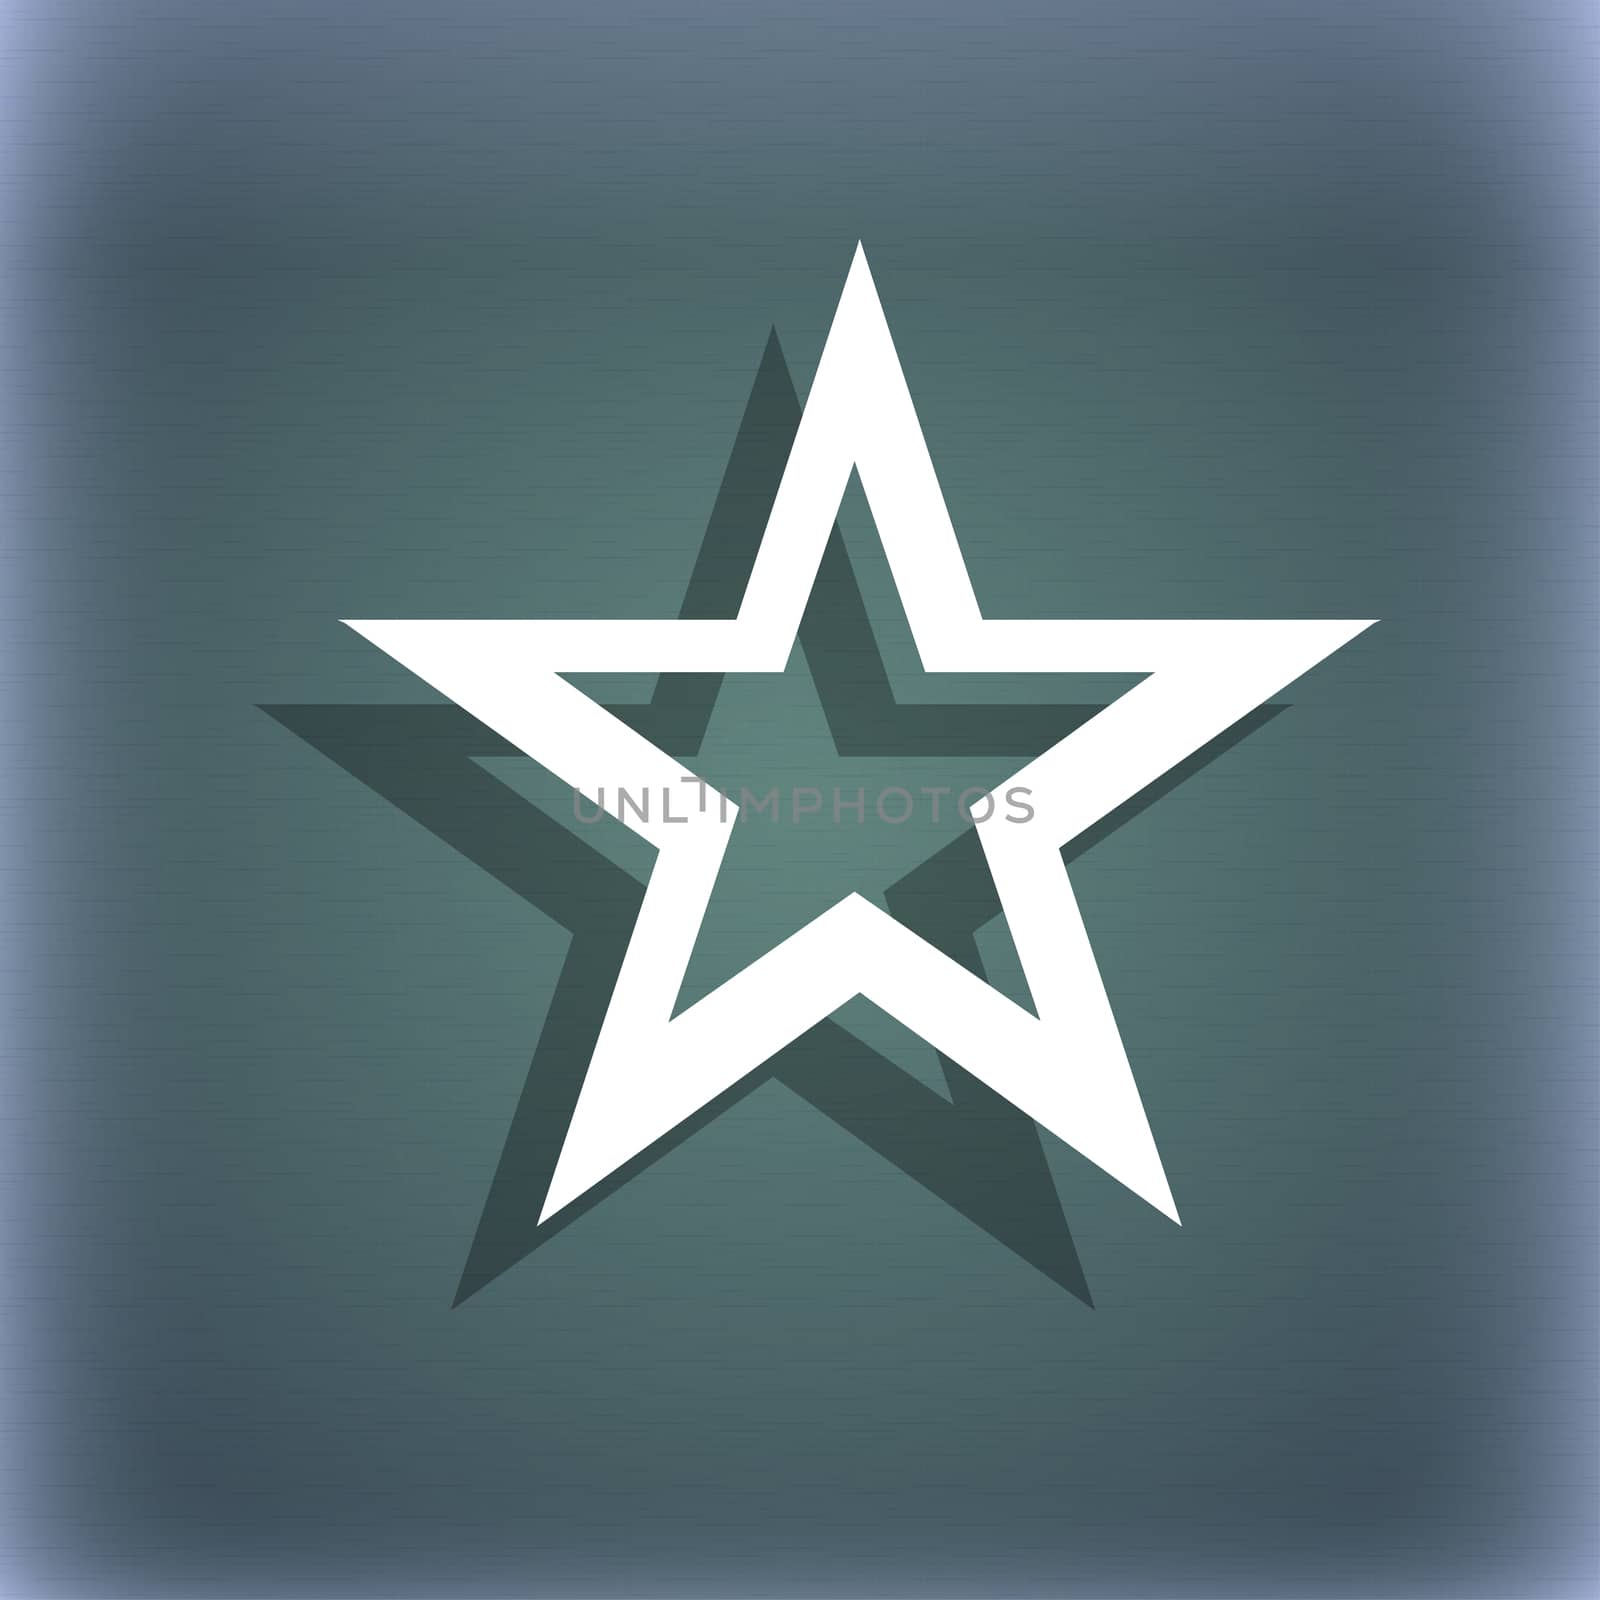 Star sign icon. Favorite button. Navigation symbol. On the blue-green abstract background with shadow and space for your text.  by serhii_lohvyniuk